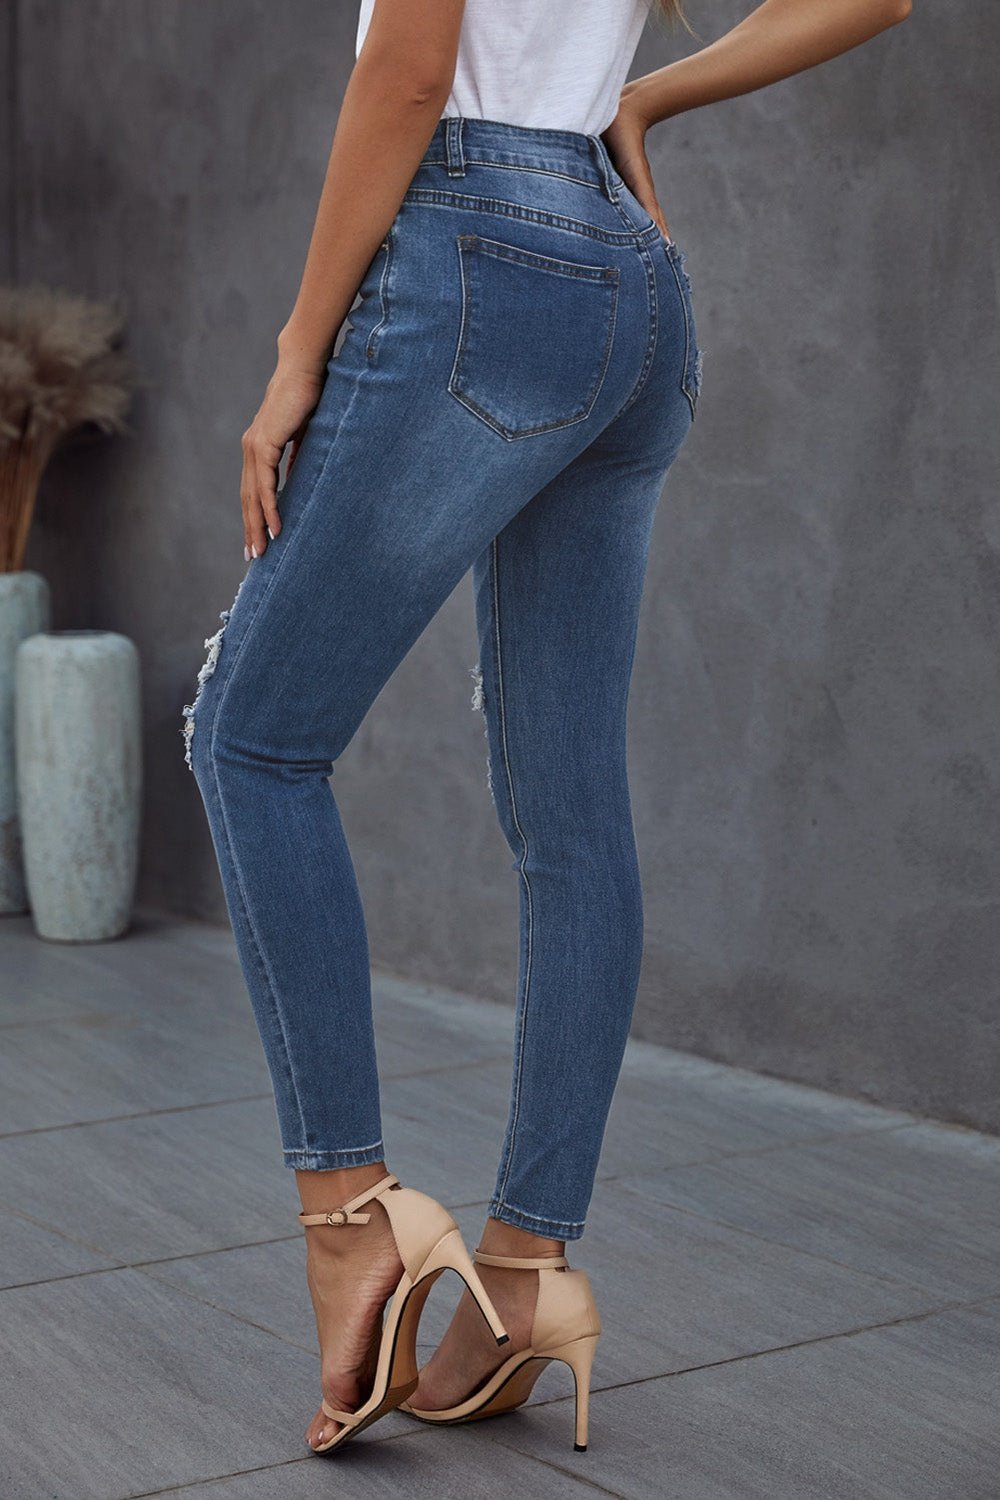 Vintage Skinny Ripped Jeans - Jeans - FITGGINS